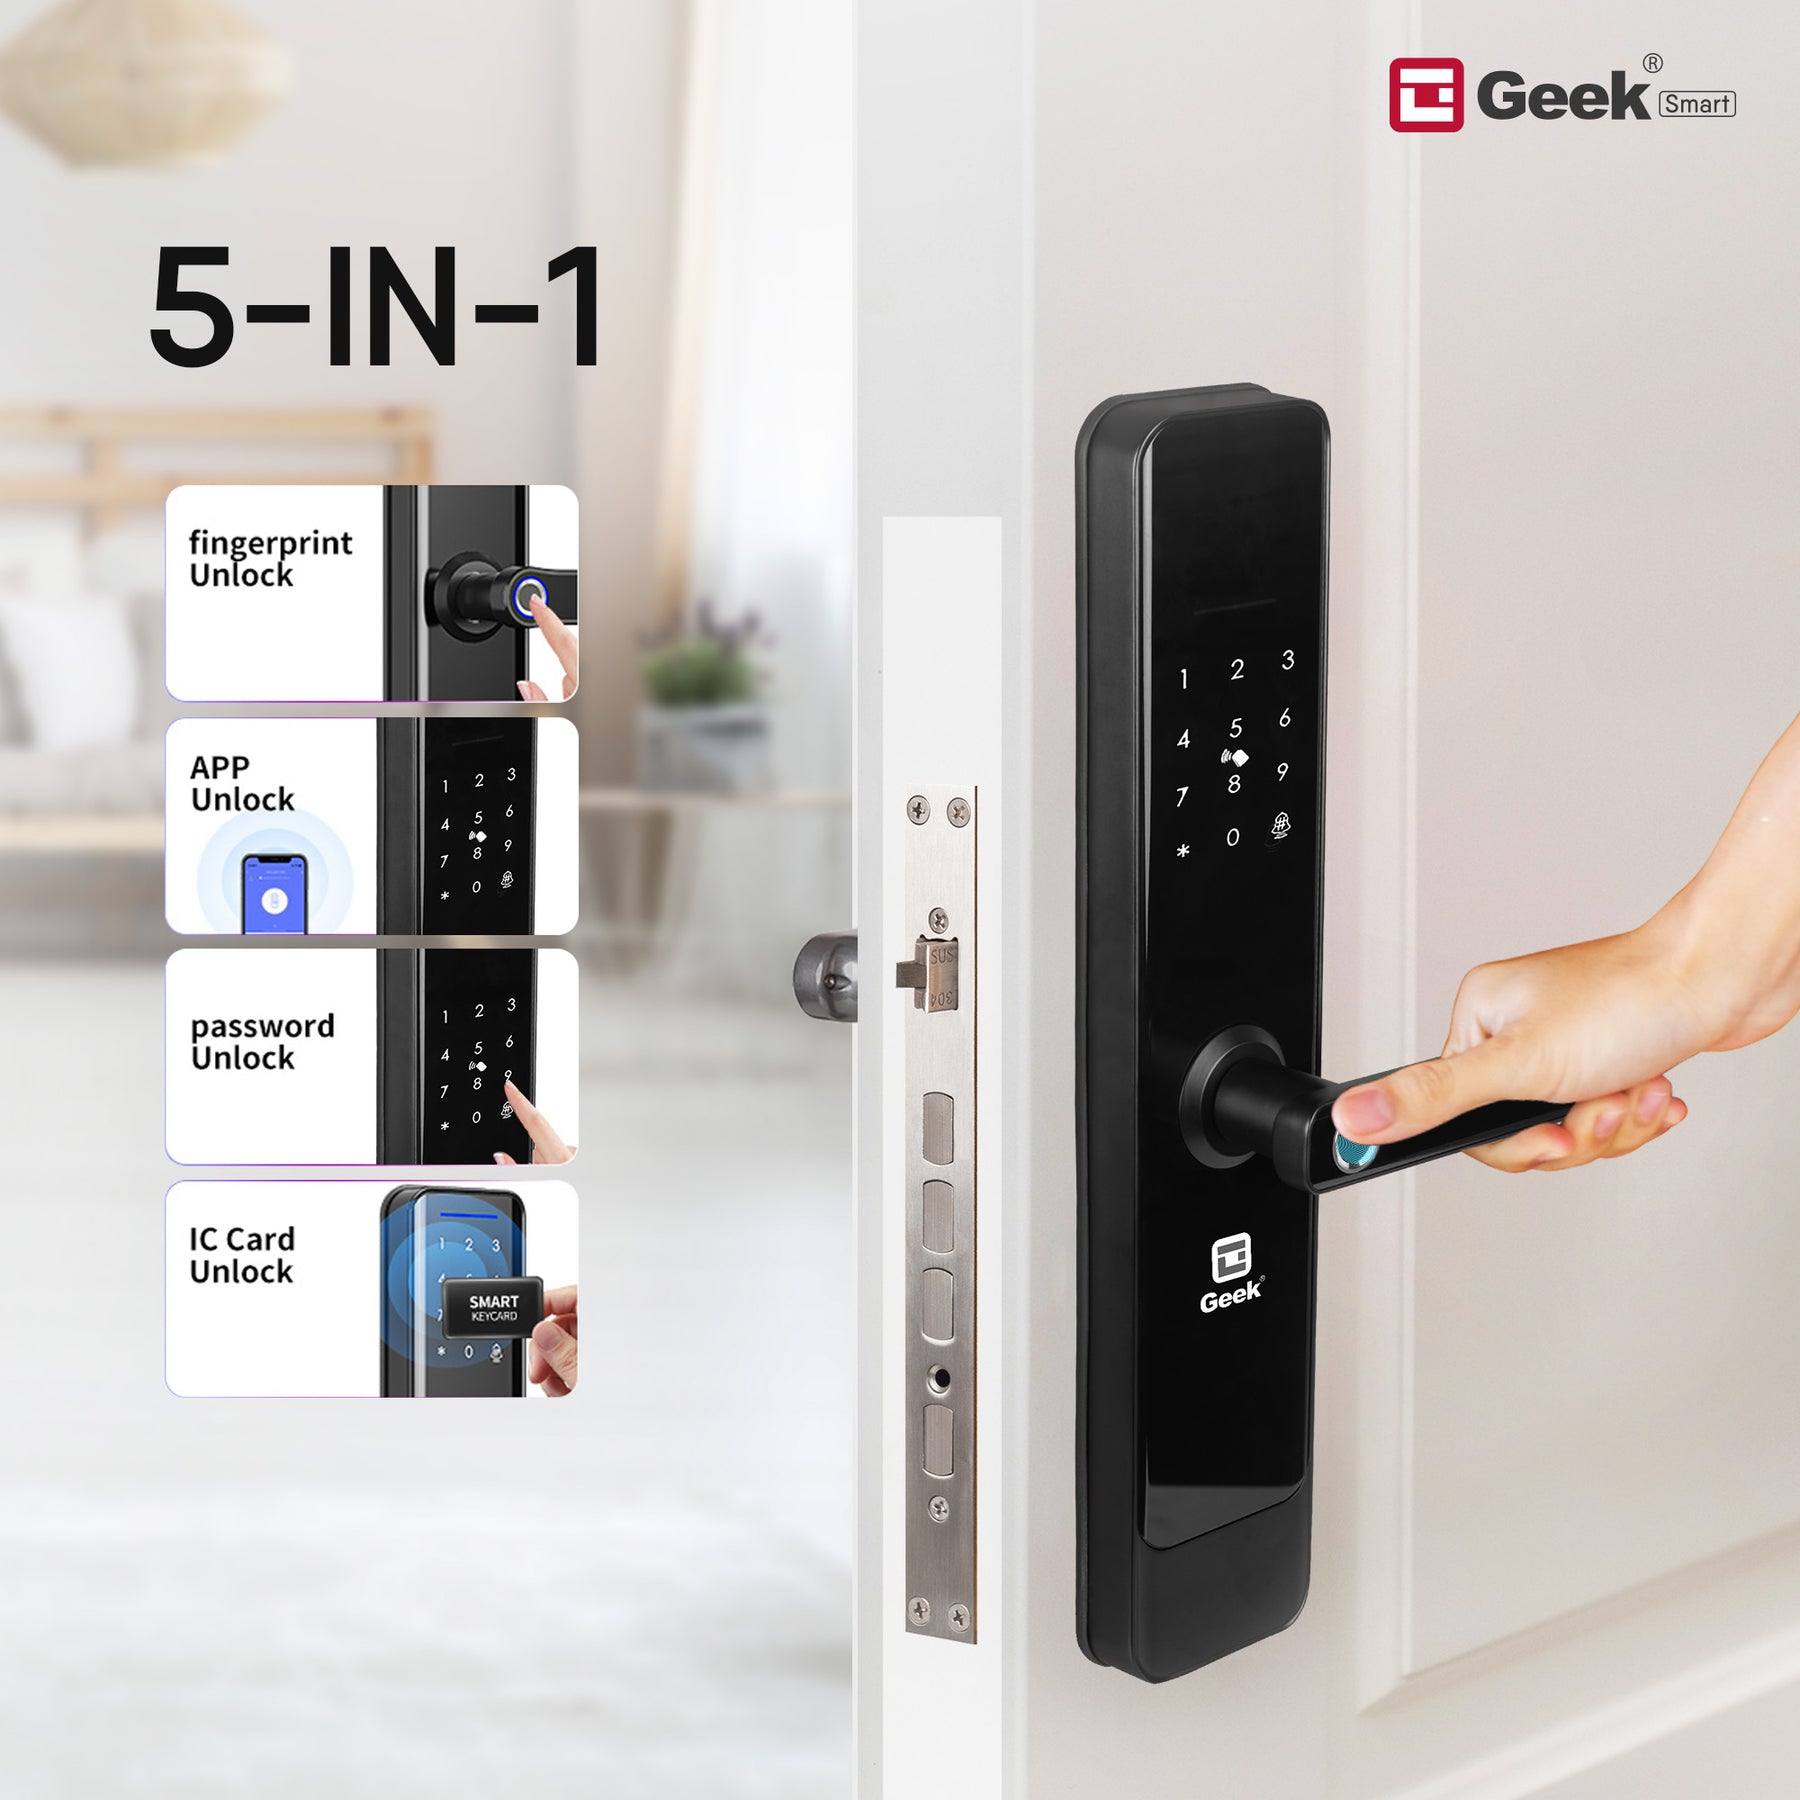 Geek E908 Wi-Fi Enabled 5-in-1 Smart Digital Door Lock With 5 Locking  Bolts, App Support and Biometric Fingerprint Access (Black)